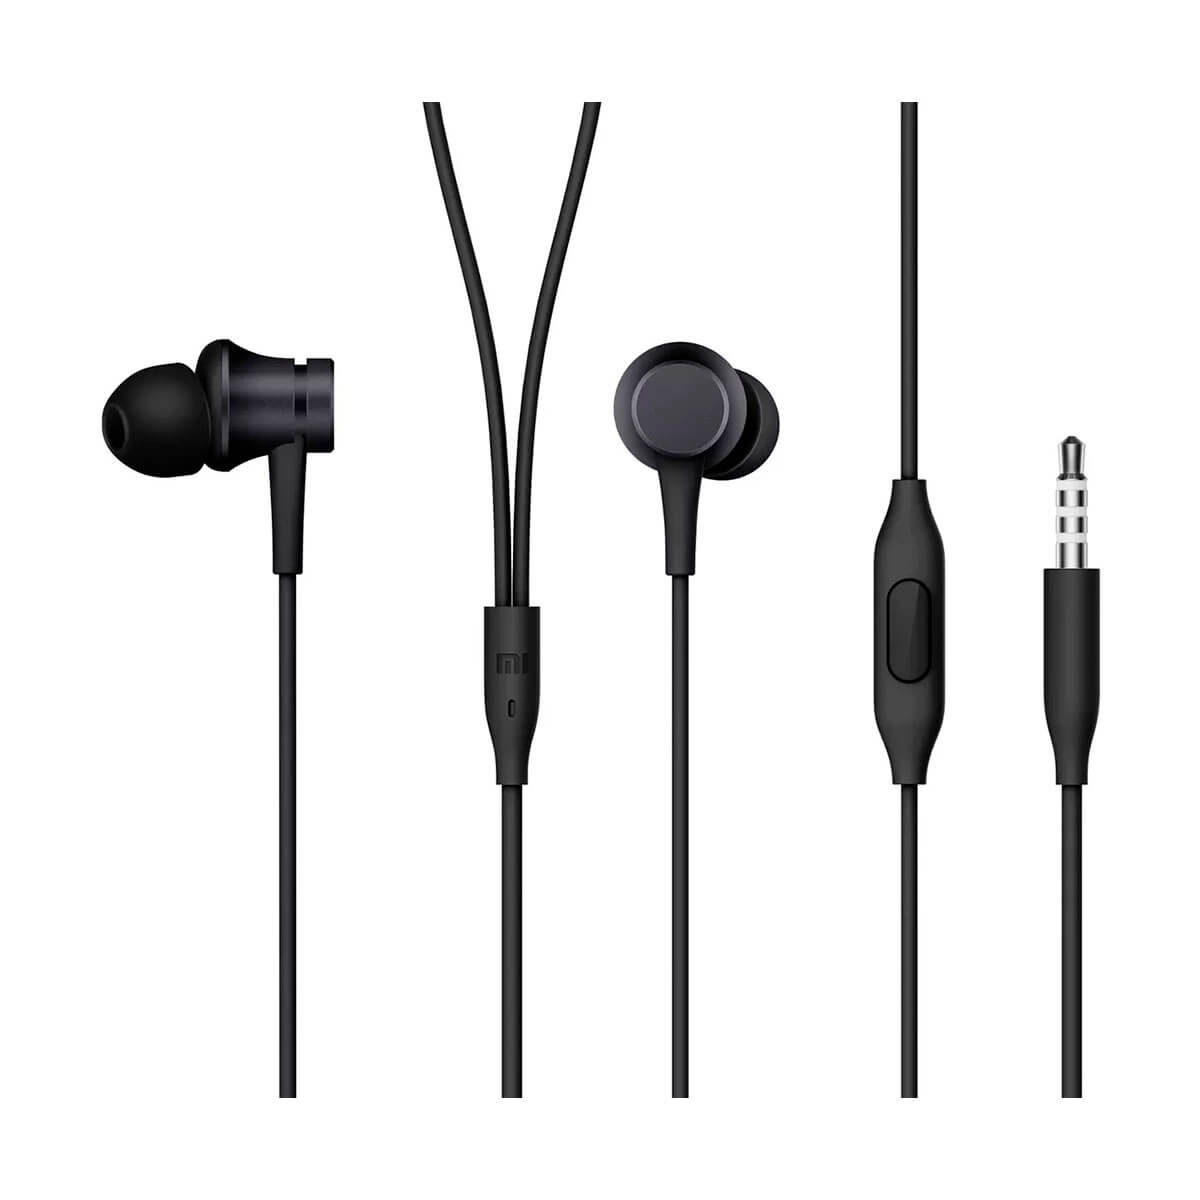 XIAOMI MI IN-EAR HEADPHONES BASIC AURICULARES CON CABLE NEGRO (BLACK) ZBW4354TY